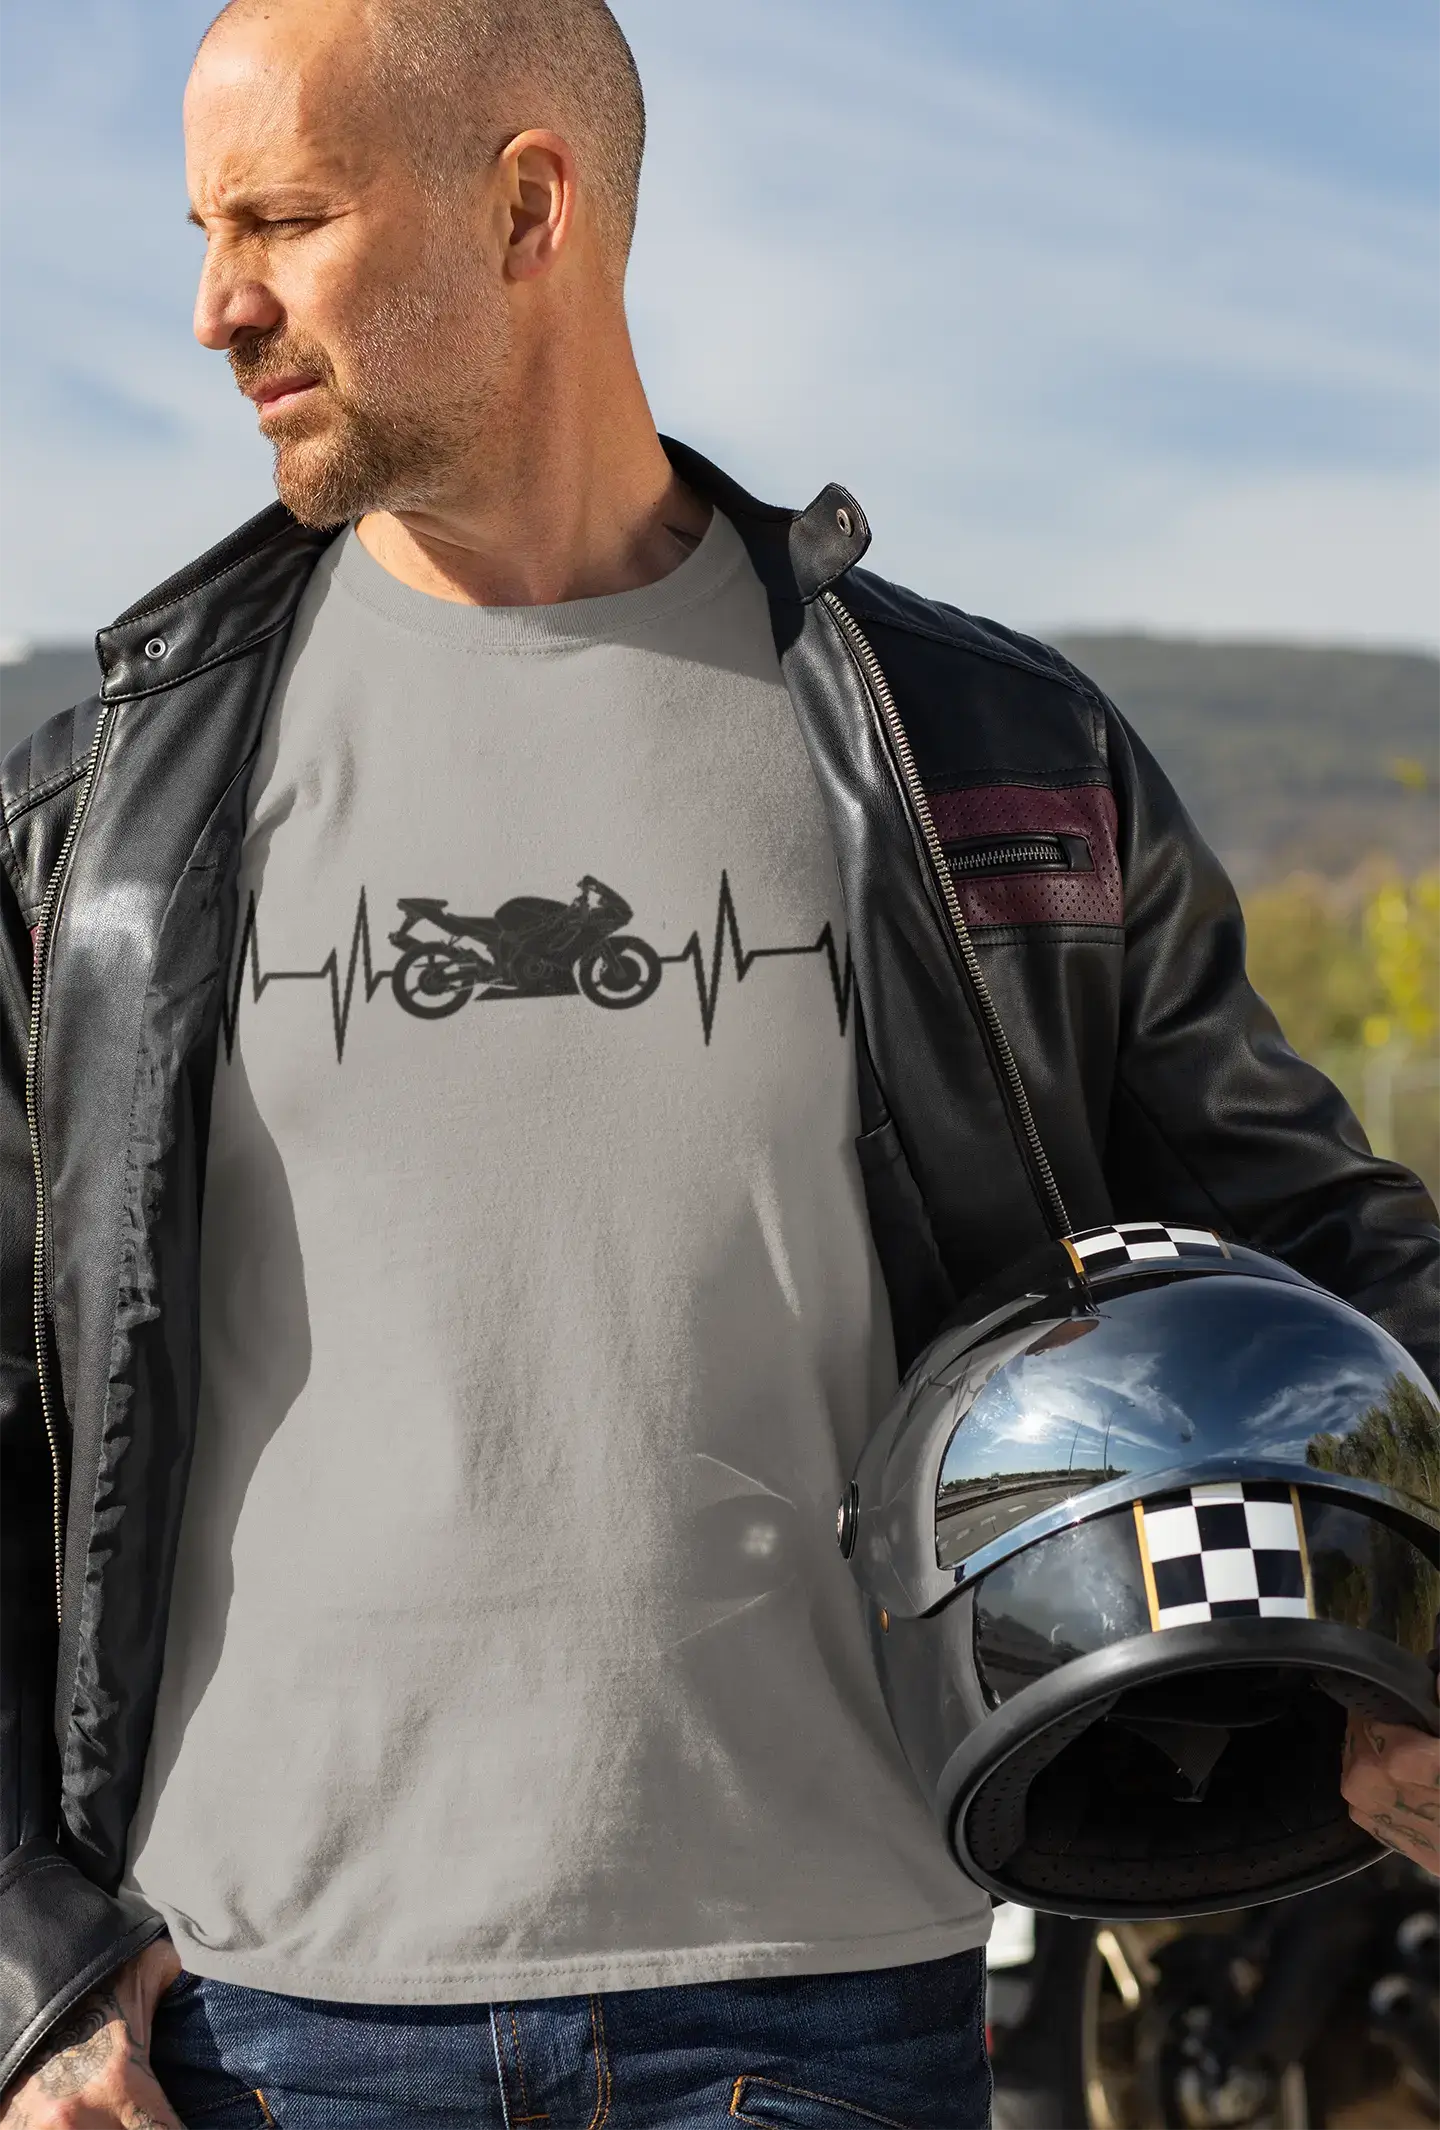 Men's Graphic T-Shirt Motorcycle Heartbeat Gift Idea